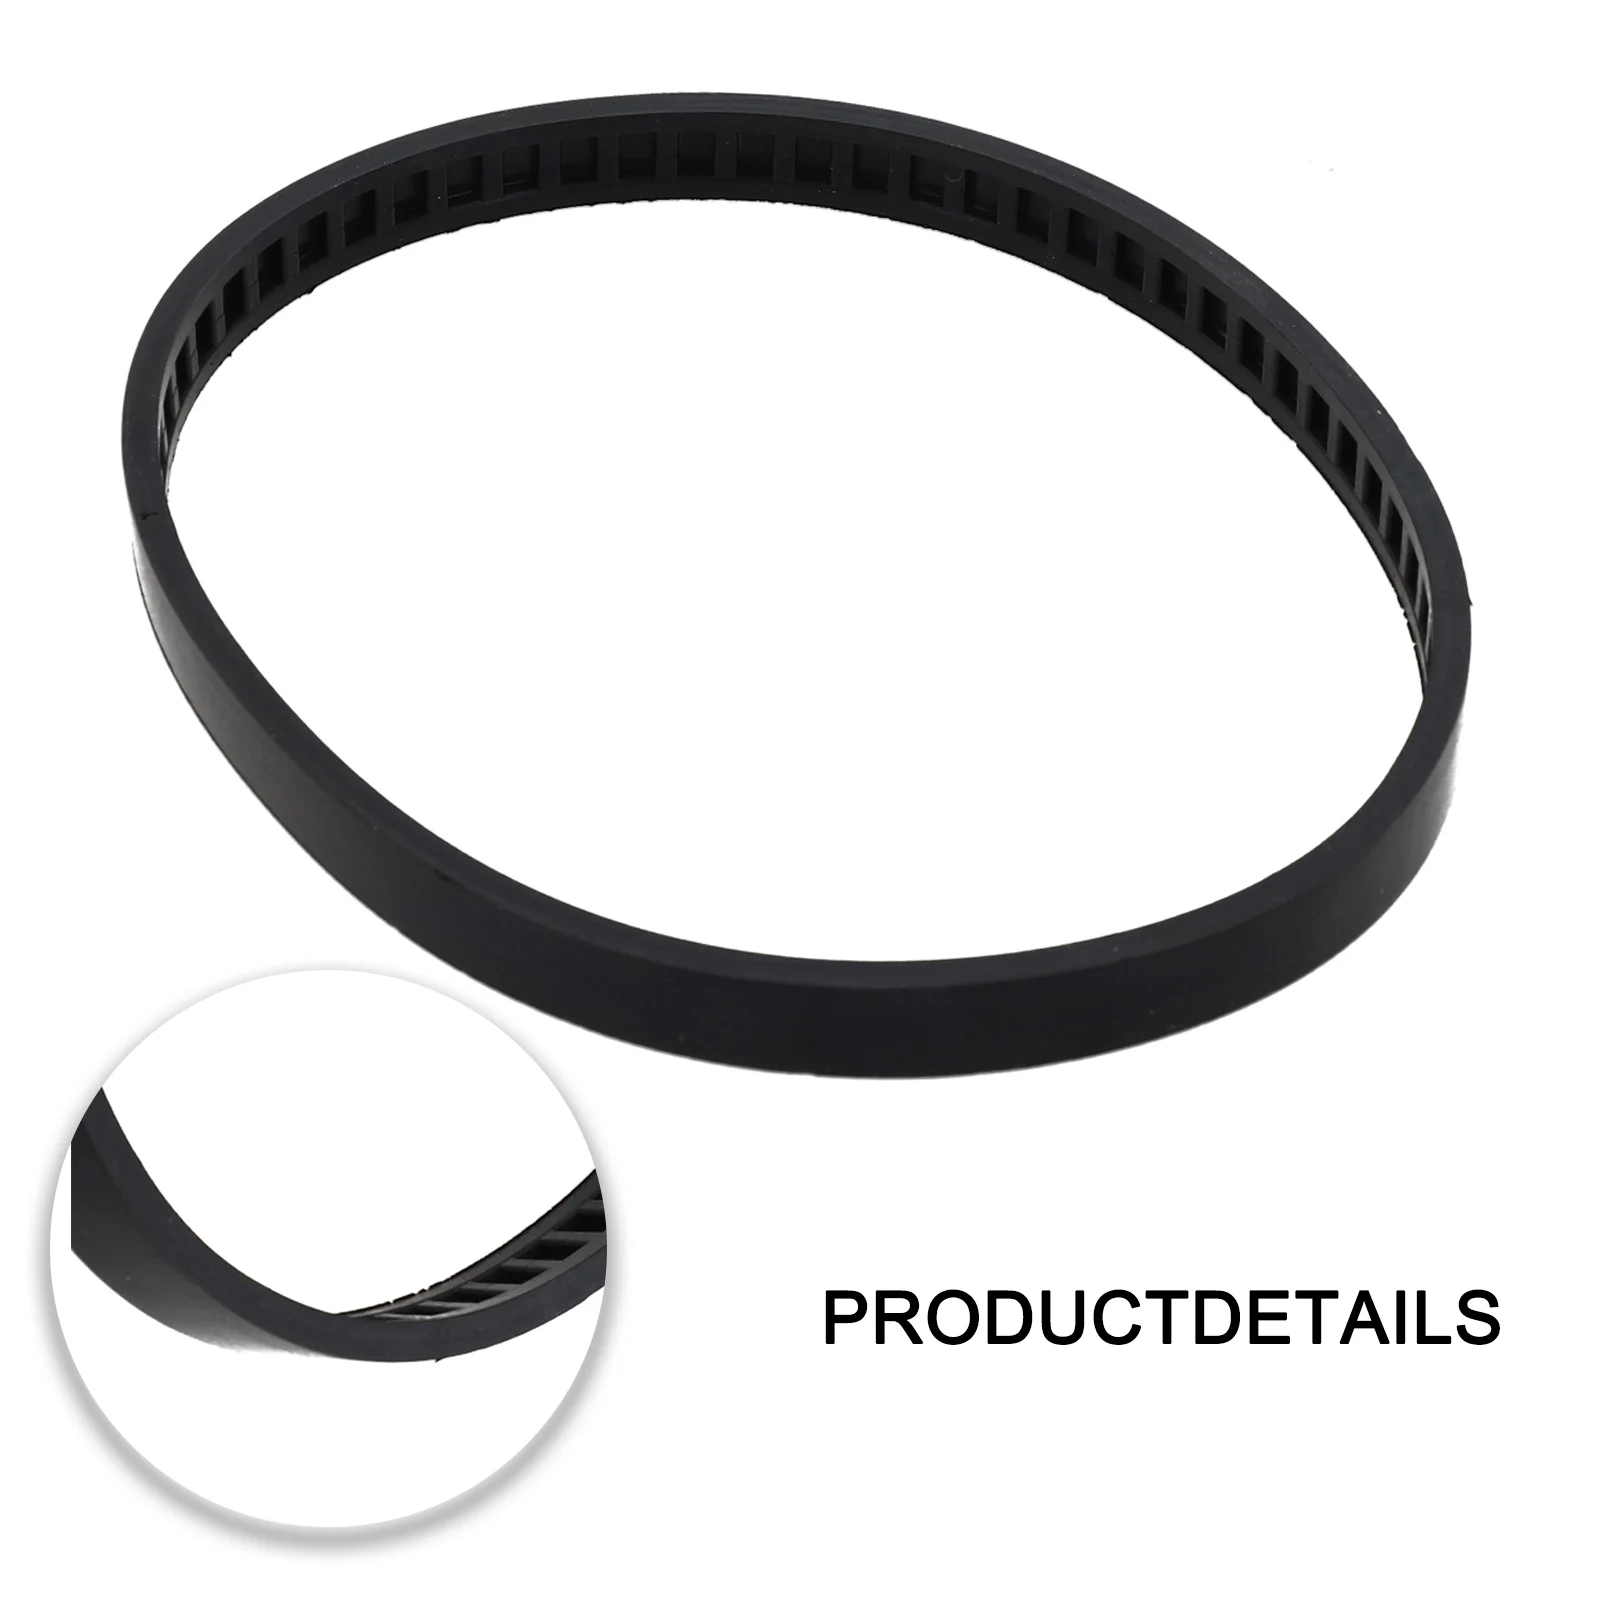 45-69-0010 Blade Pulley Tire For Milwaukee Bandsaw Part Deep Cutting Blades Balck Elastic Rubber Belt For Bandsaw Blade rubber belt s3m 288 291 294 297 300 303 309 312 318 321 324 closed loop transmission belt teeth pitch 3 mm for 3m alloy pulley